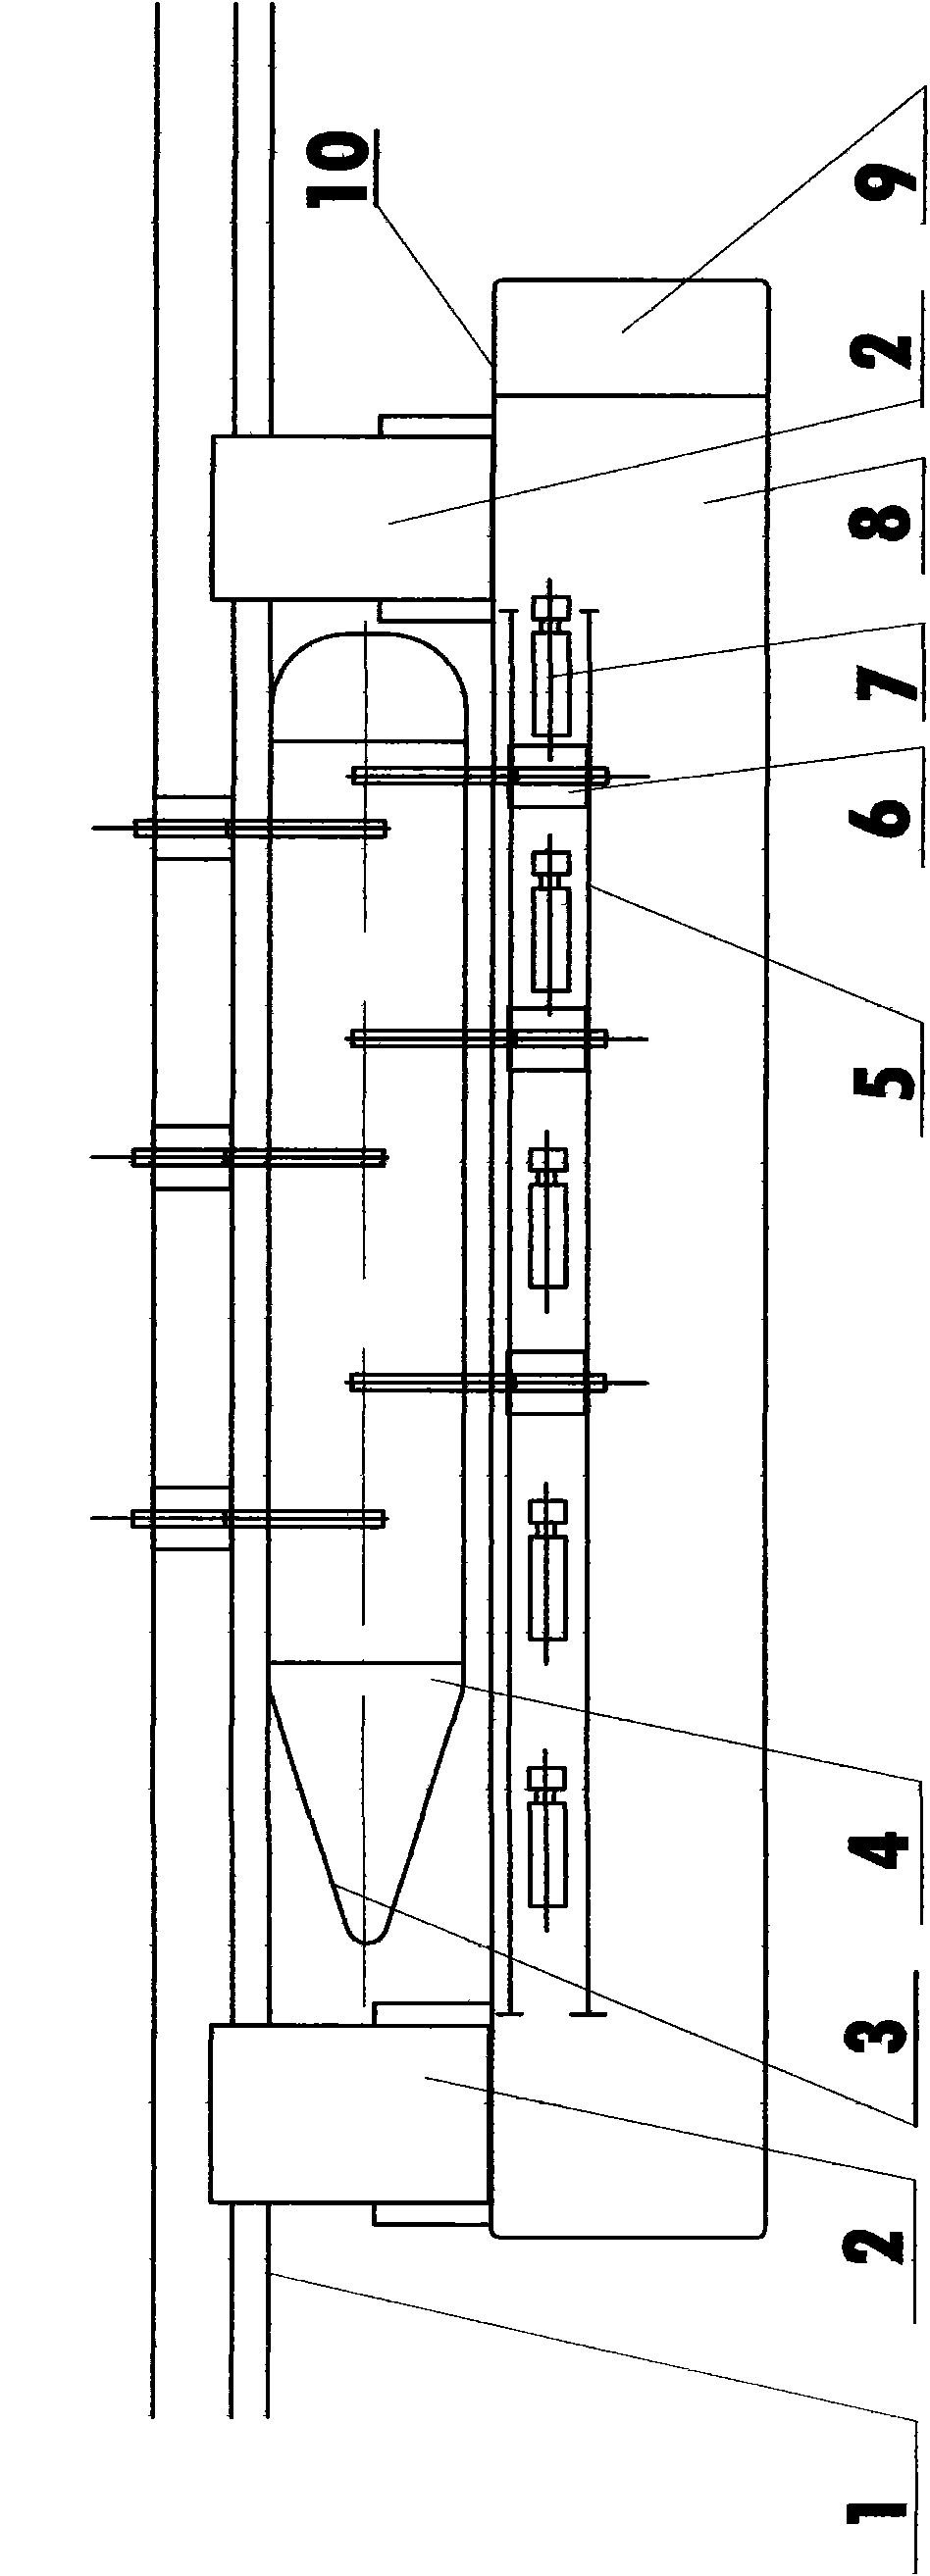 Method for improving ship handling efficiency of containers (or bulk cargo) and equipment thereof